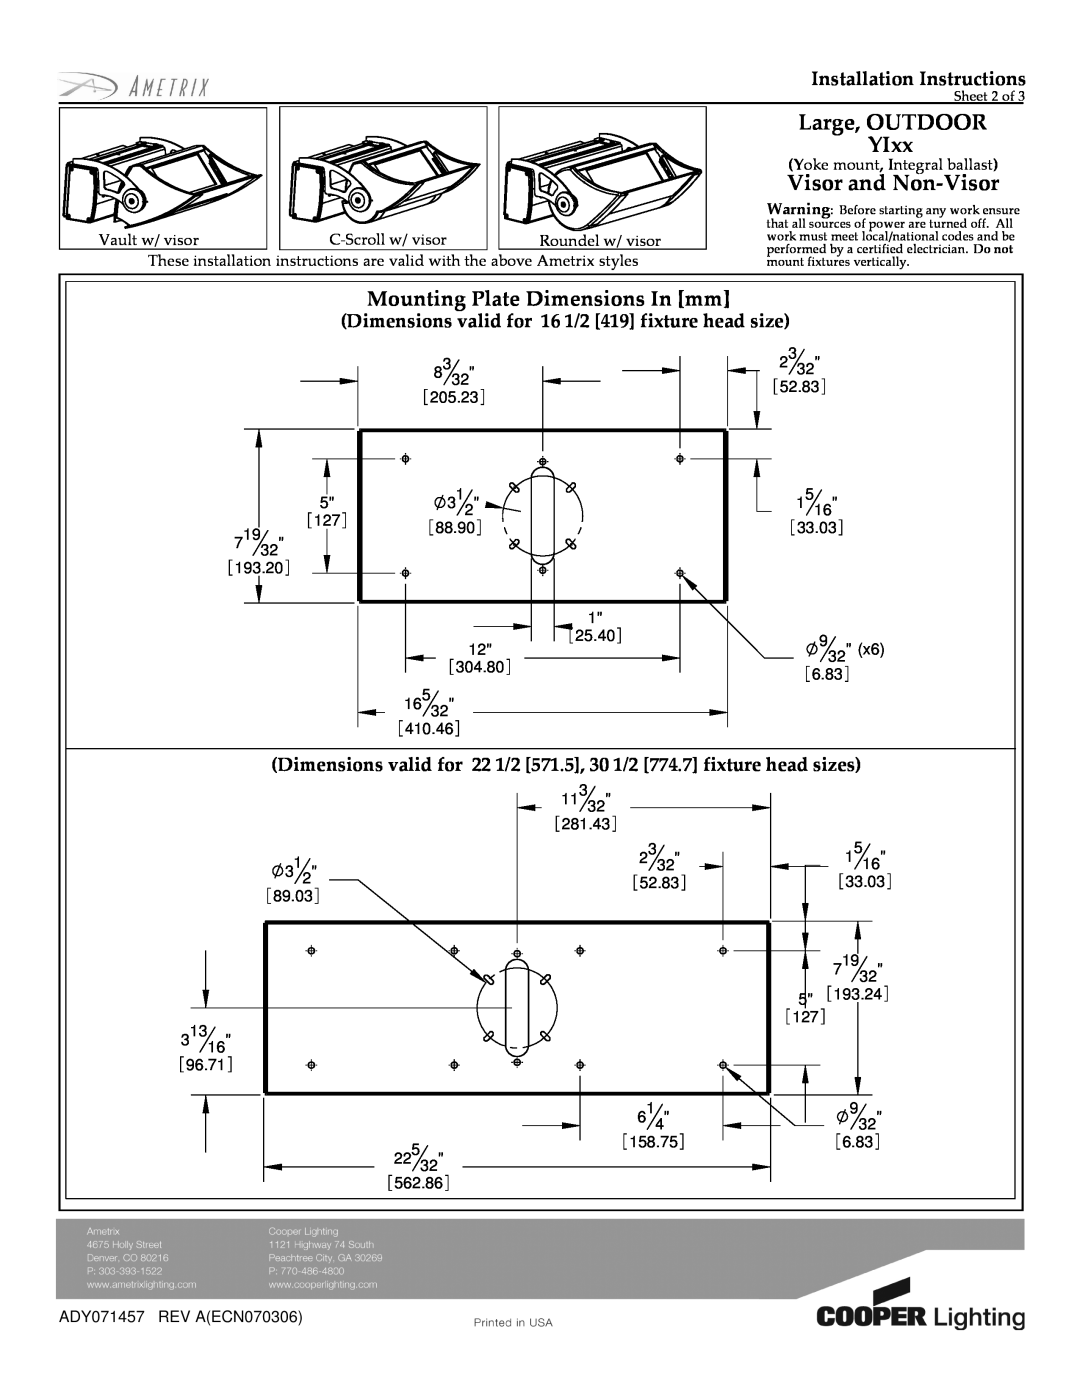 Cooper Lighting YIxx Mounting Plate Dimensions In mm, Dimensions valid for 16 1/2 419 fixture head size 